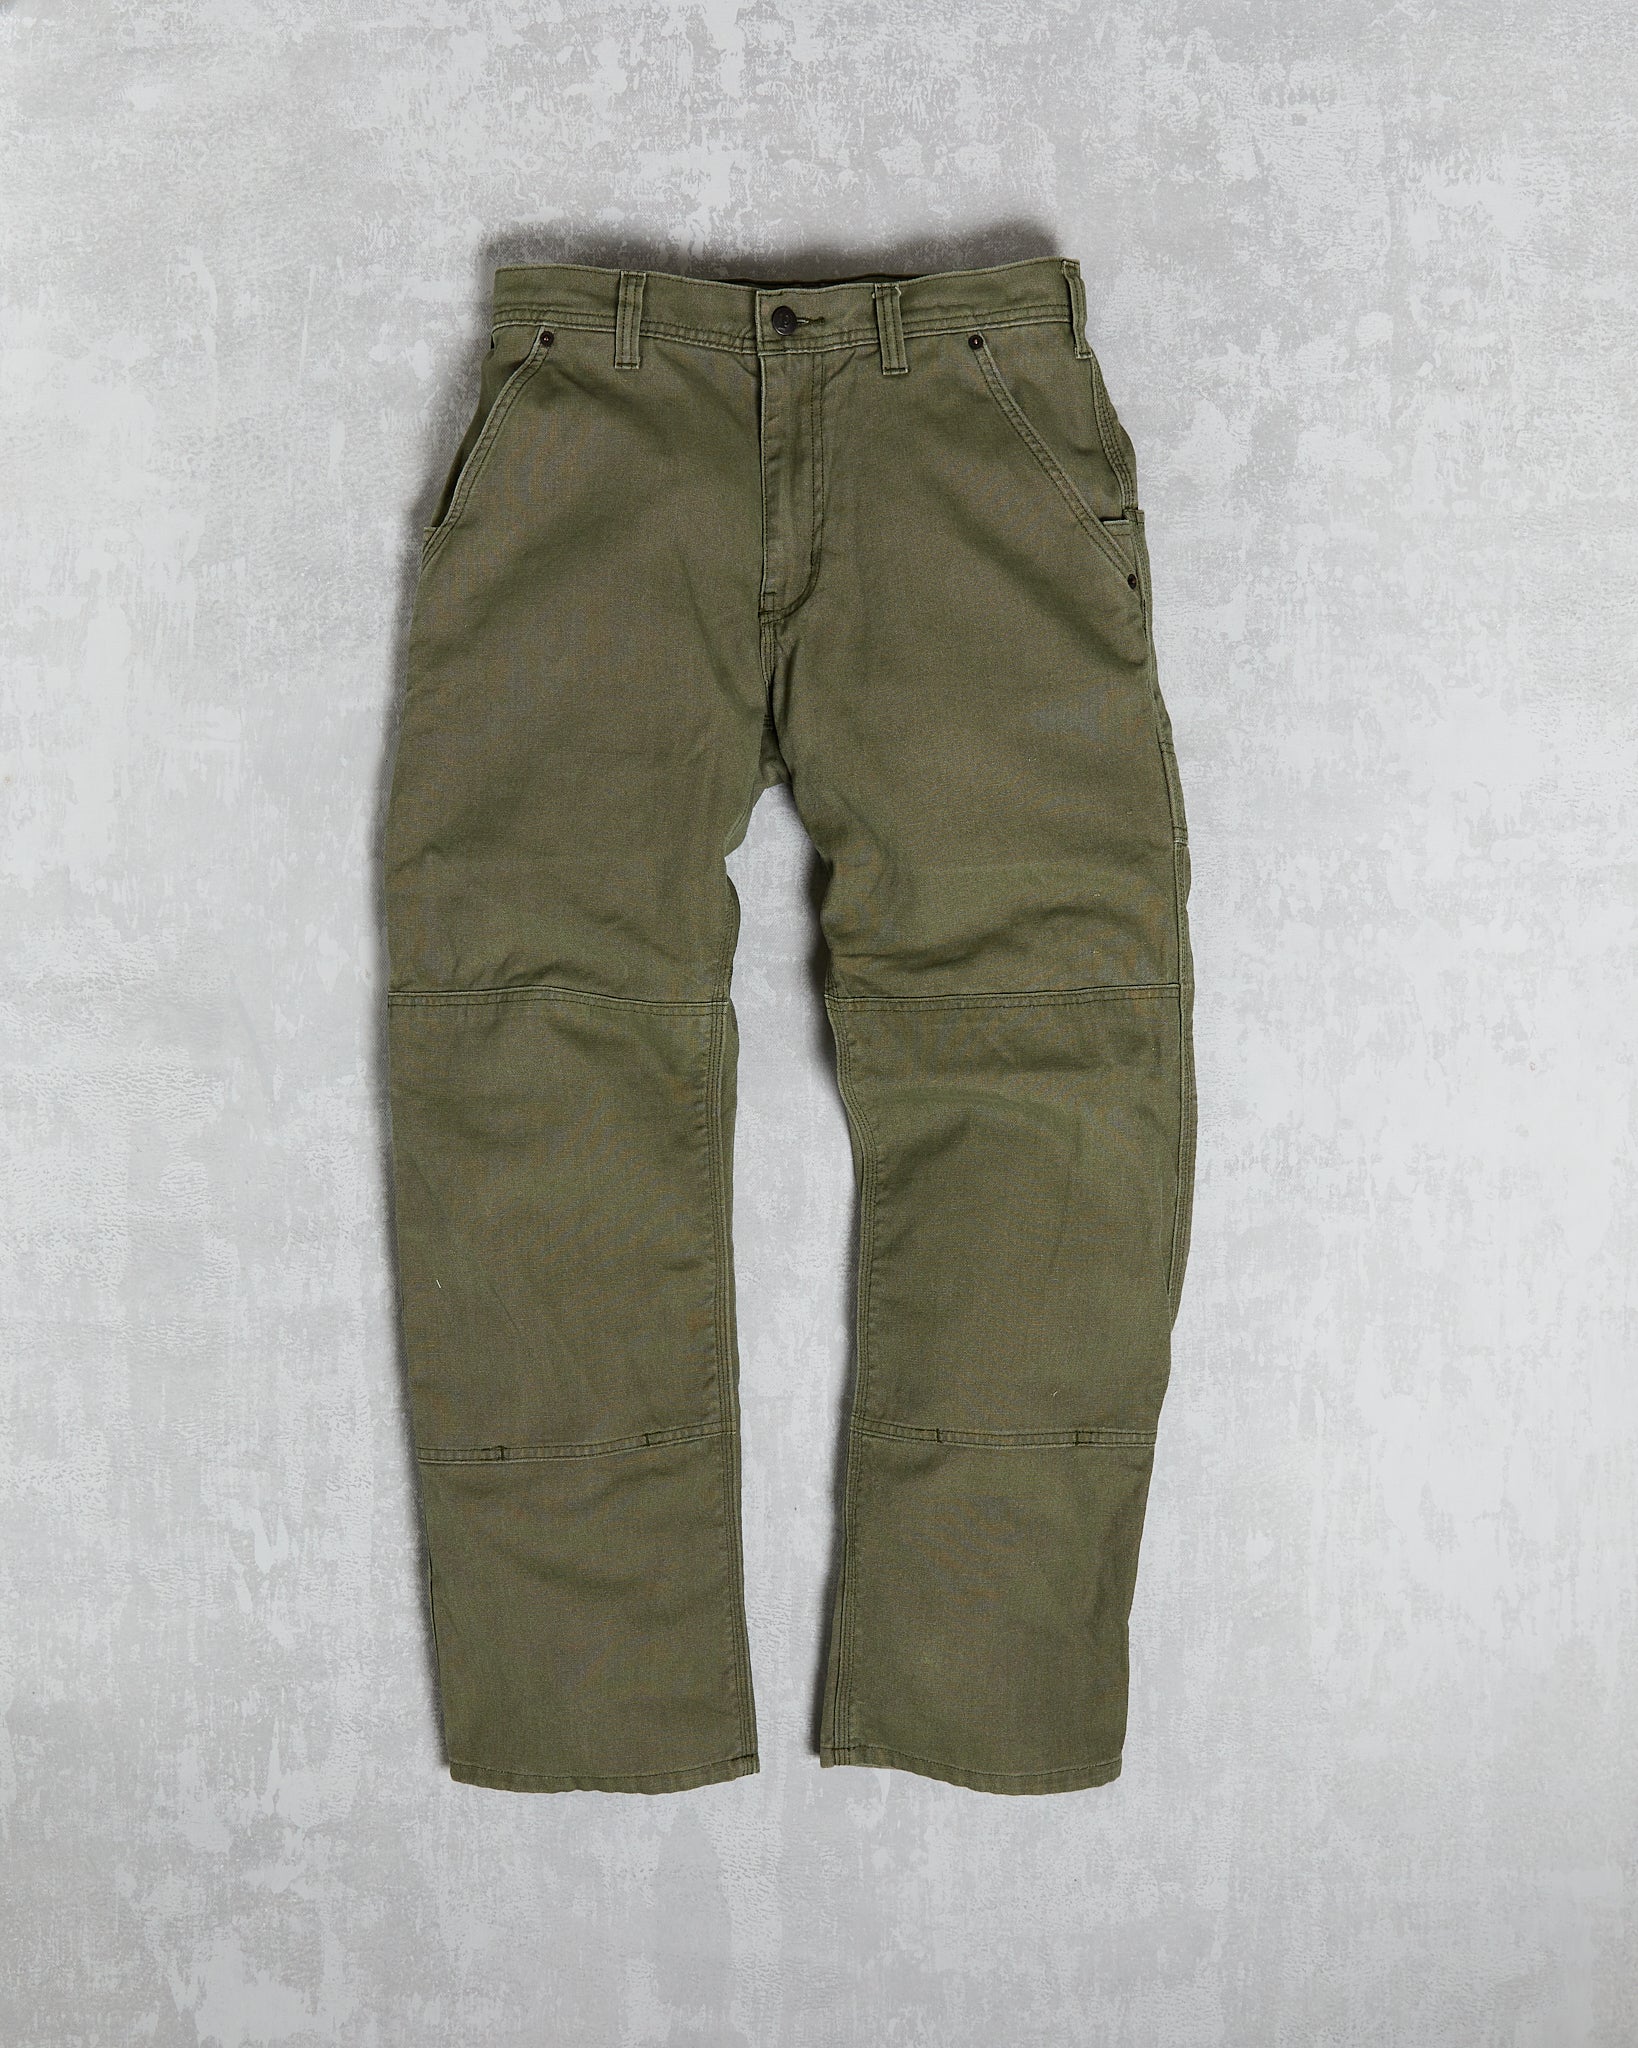 Patagonia stand up canvas pants green army olive 32